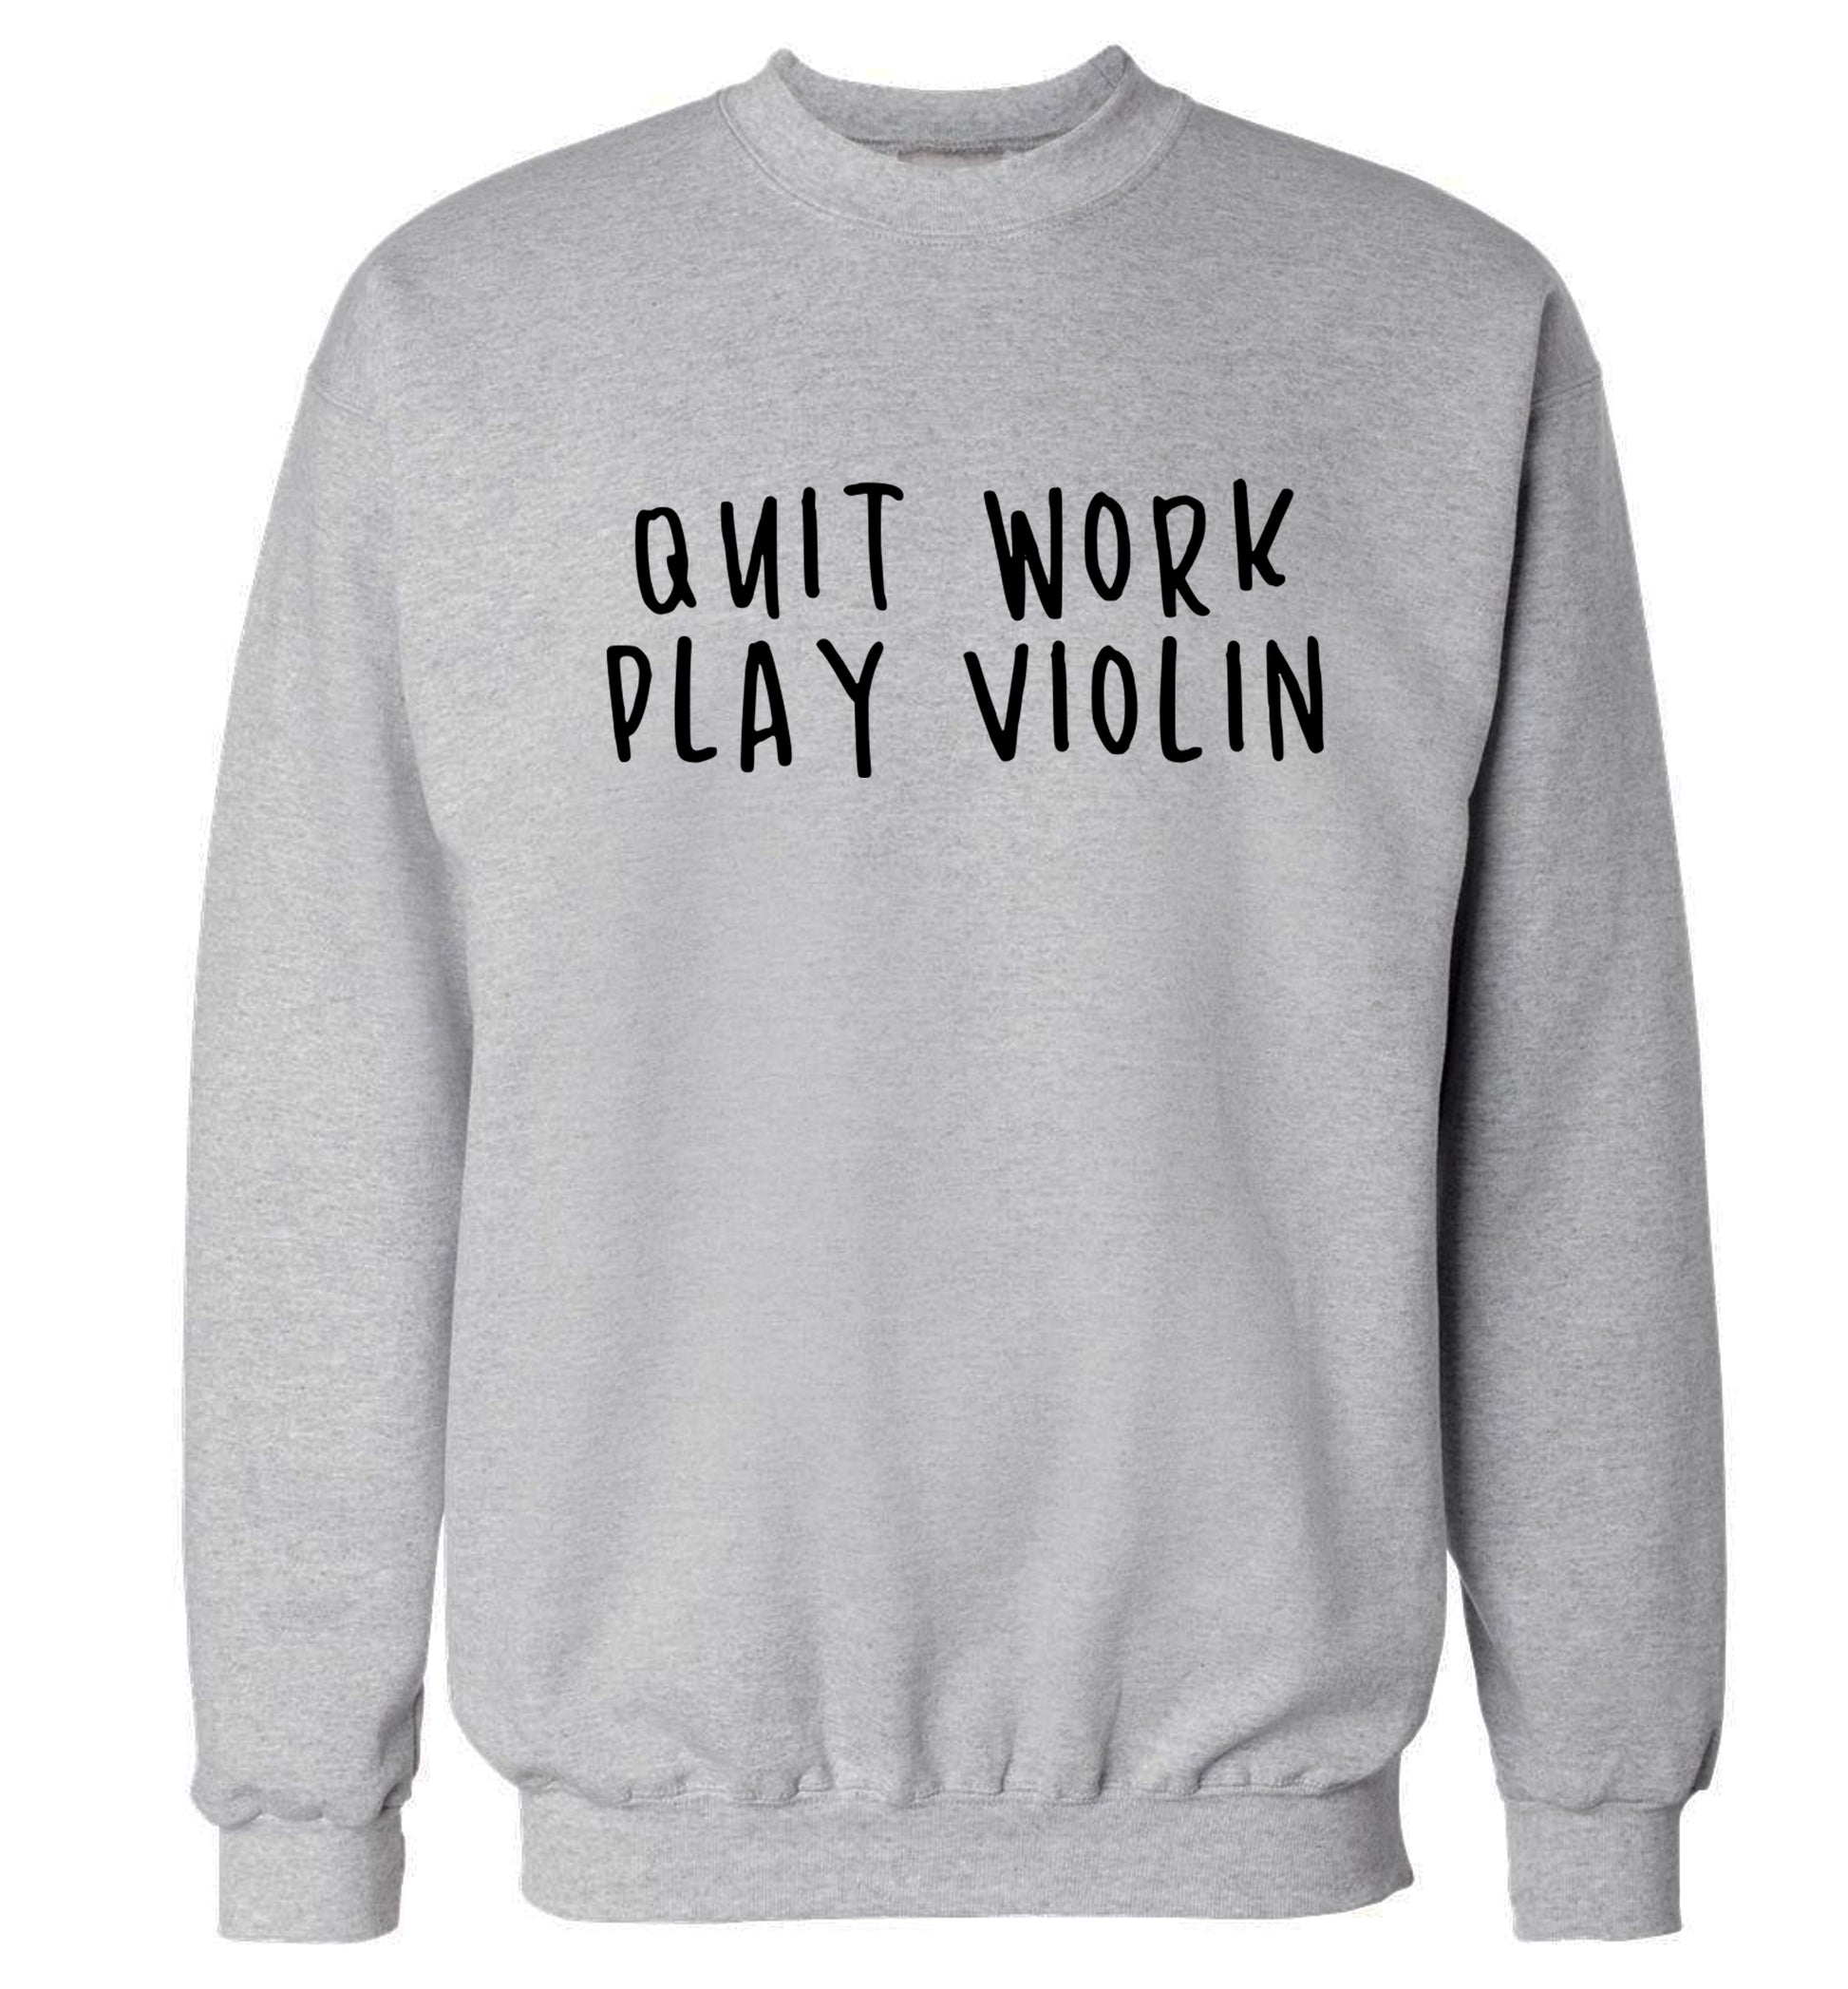 Quit work play violin Adult's unisex grey Sweater 2XL